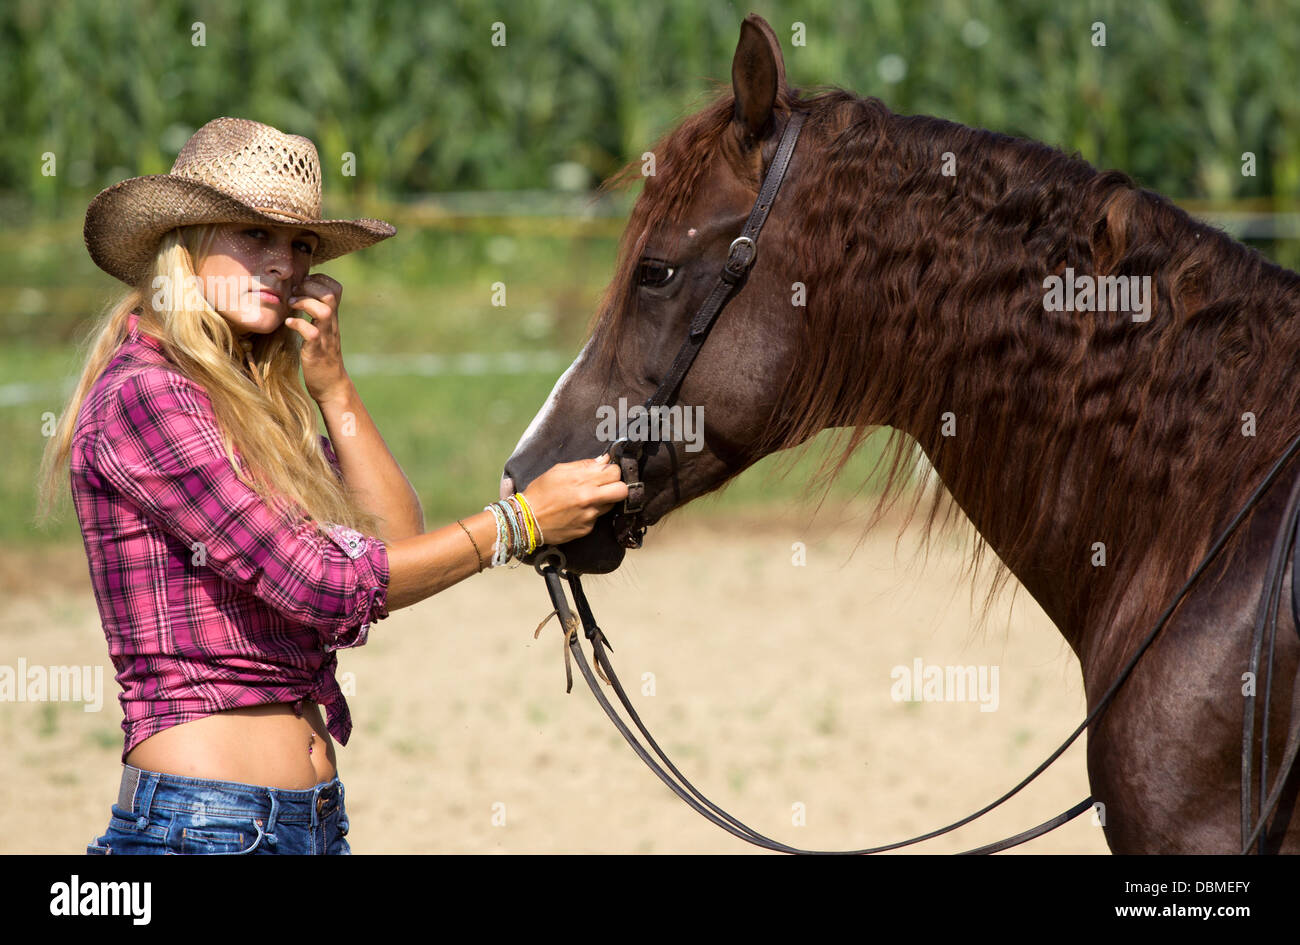 Beautiful blond woman holding brown horse. Stock Photo